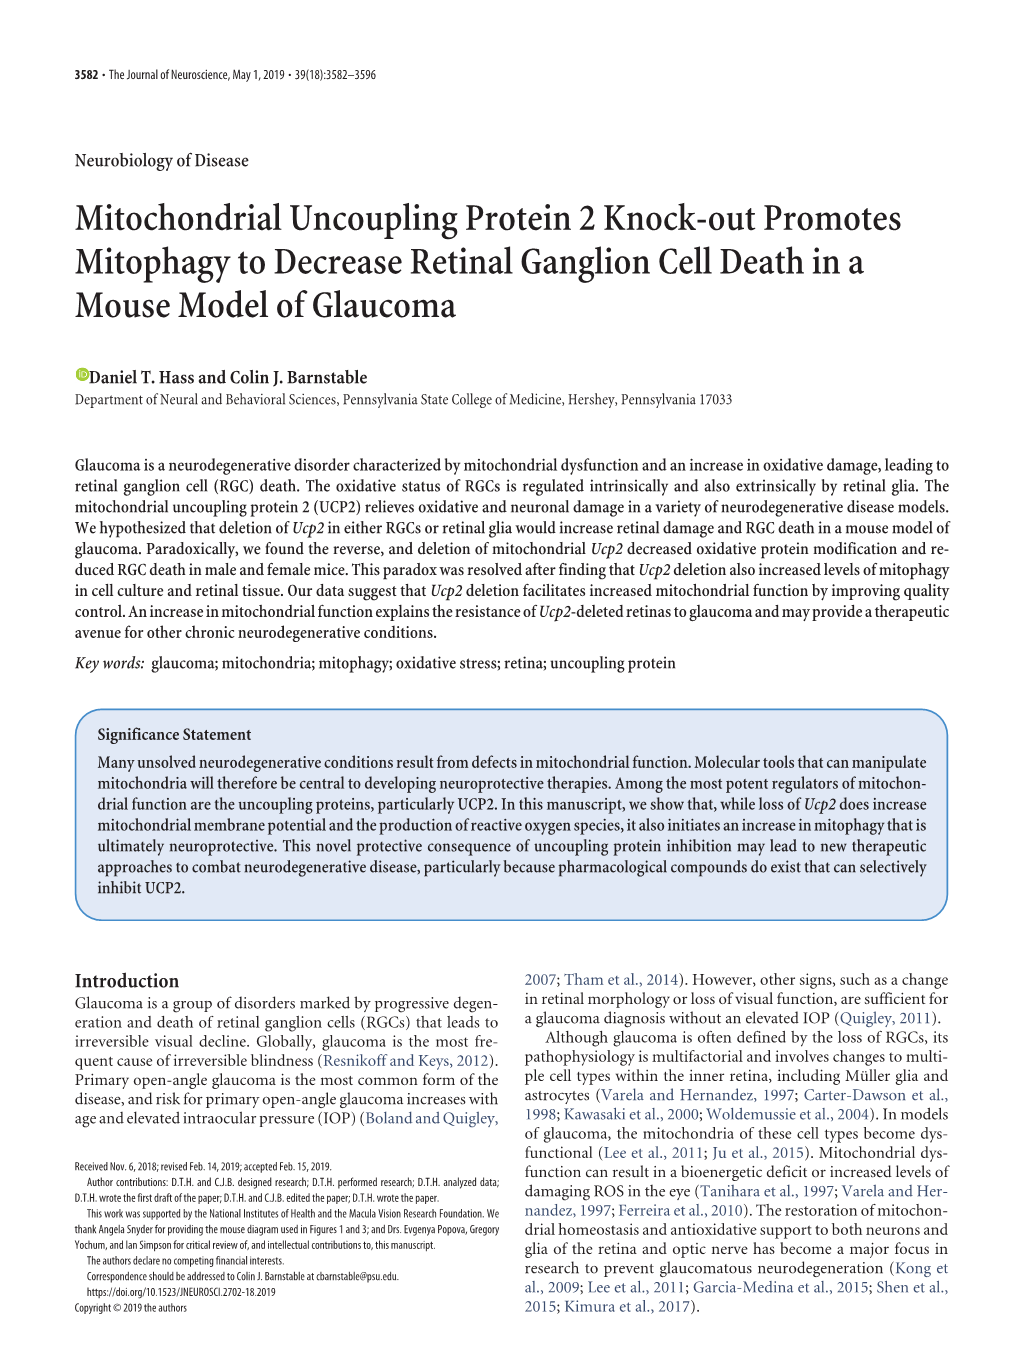 Mitochondrial Uncoupling Protein 2 Knock-Out Promotes Mitophagy to Decrease Retinal Ganglion Cell Death in a Mouse Model of Glaucoma